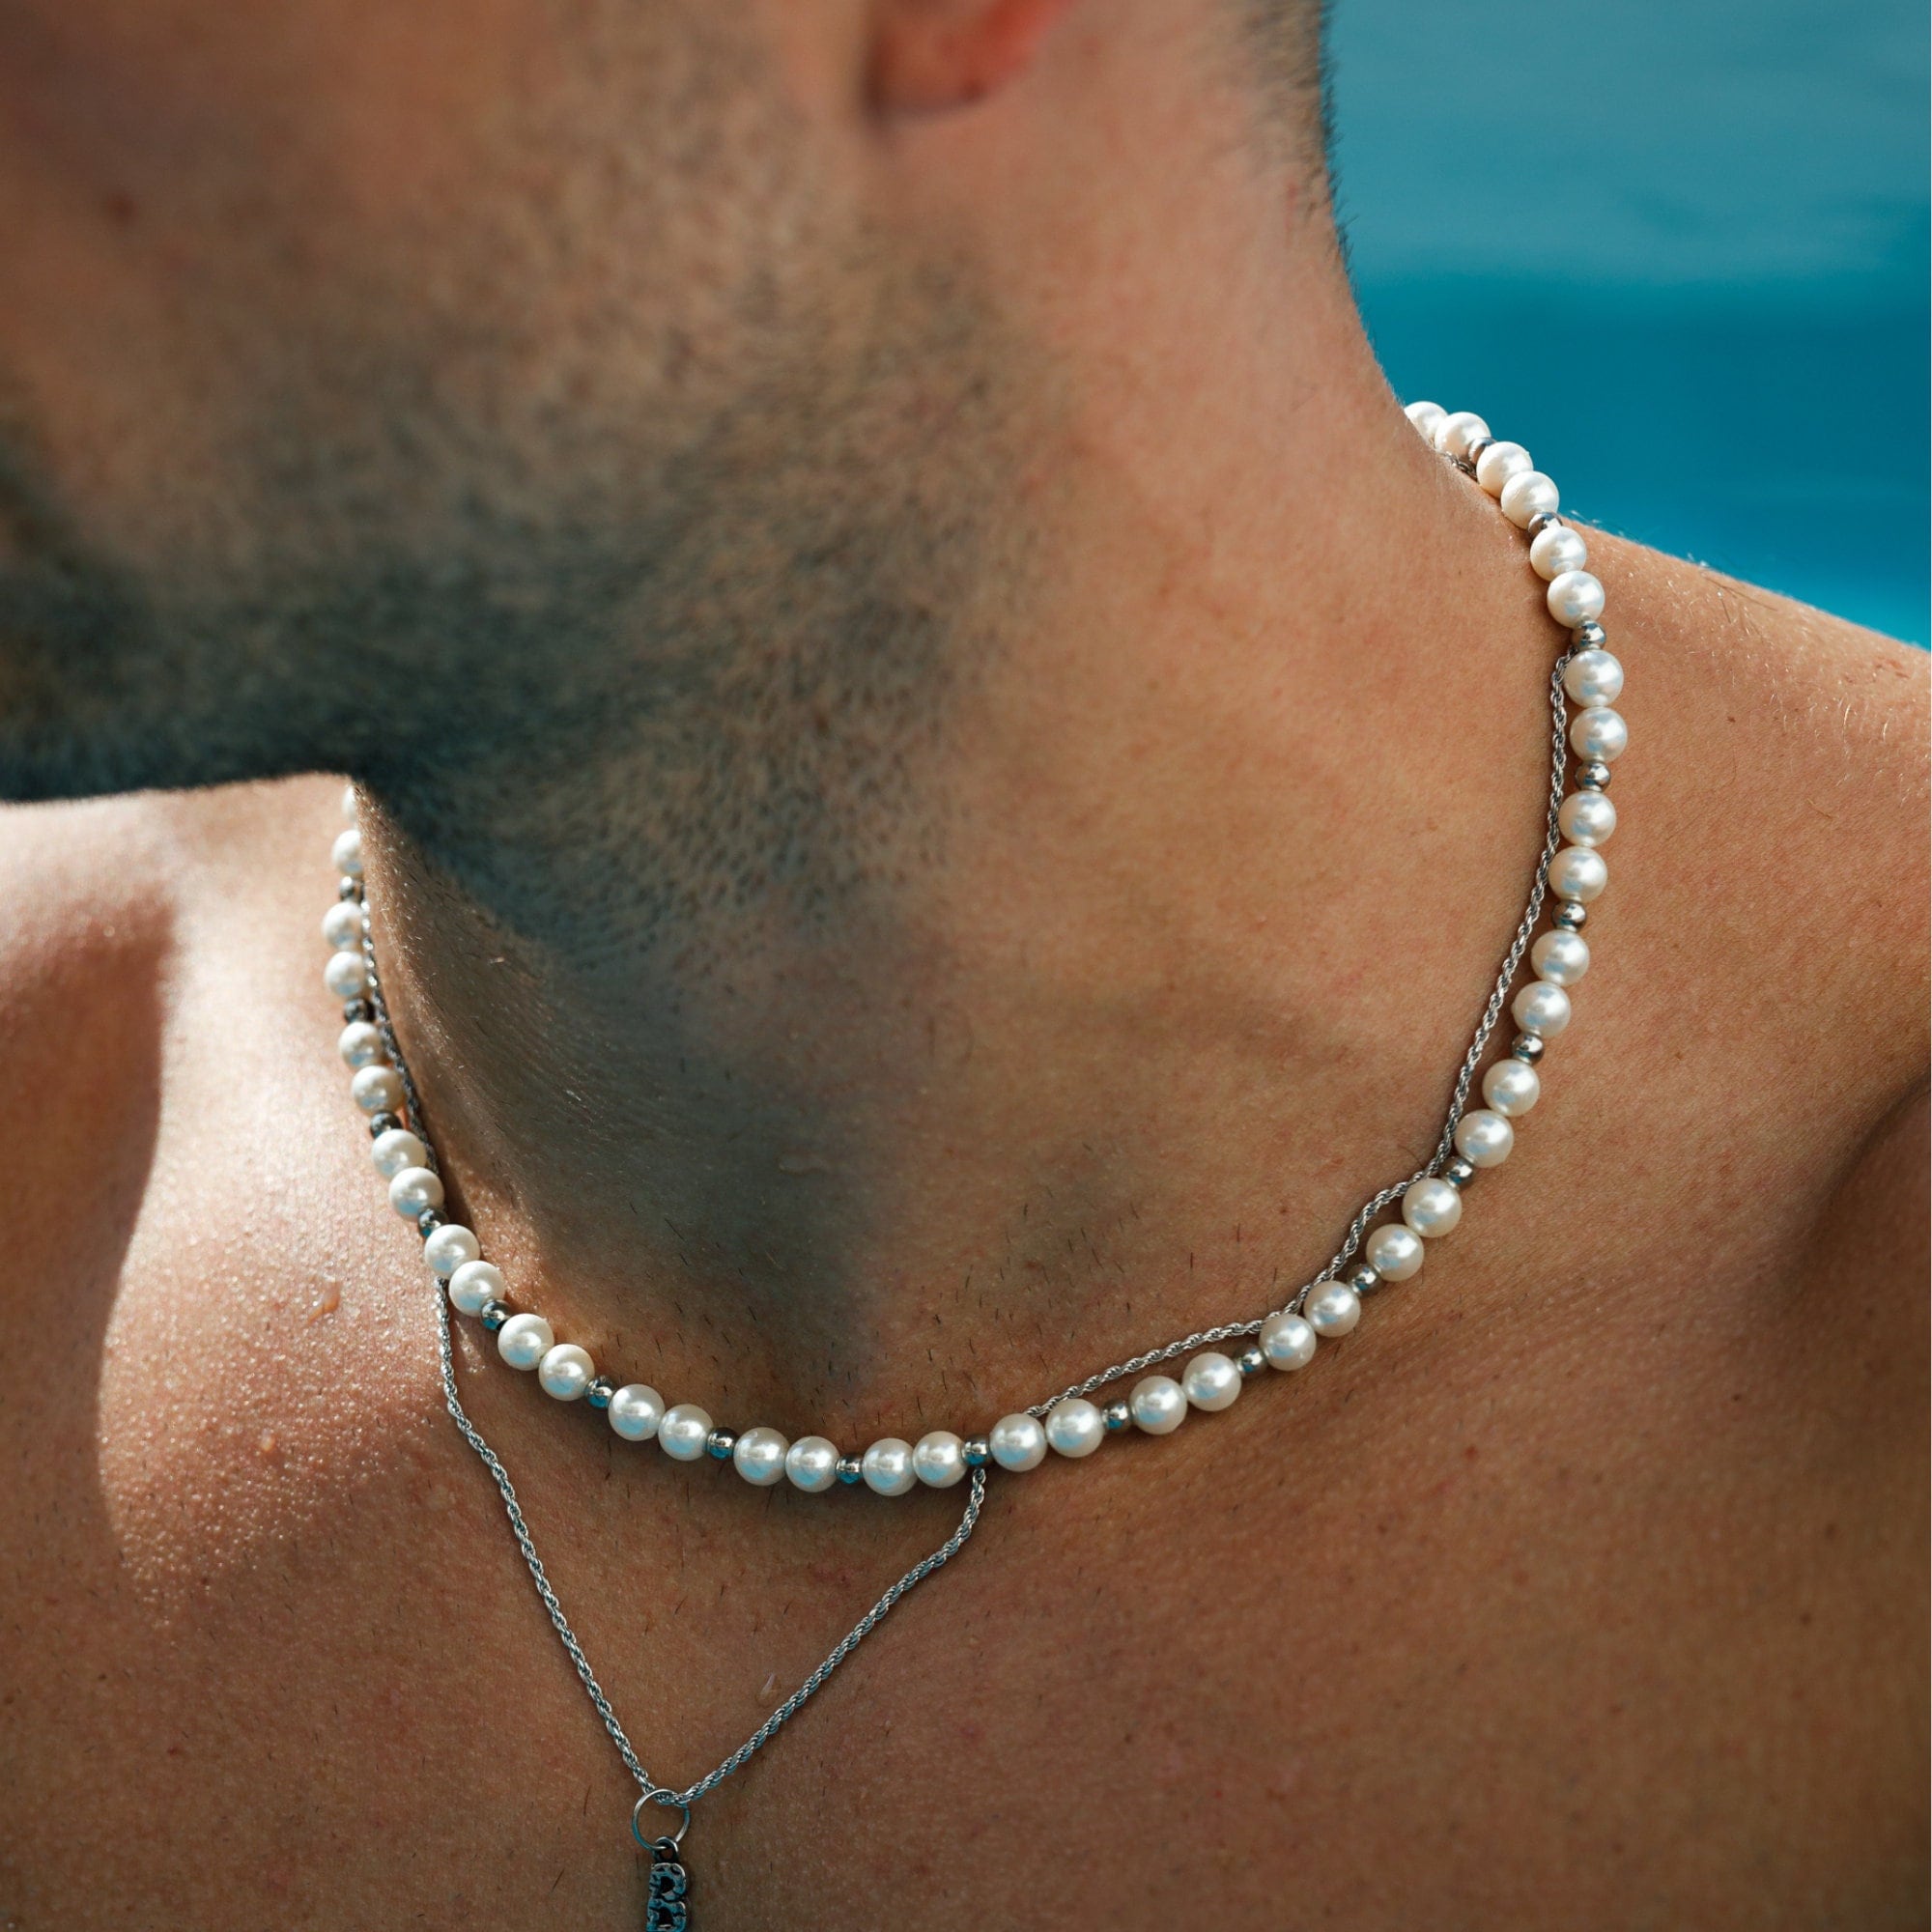 Pearl Necklace for Men,Pearl Necklaces for Women,6mm White Pearl Necklace  Jewelry | Amazon.com